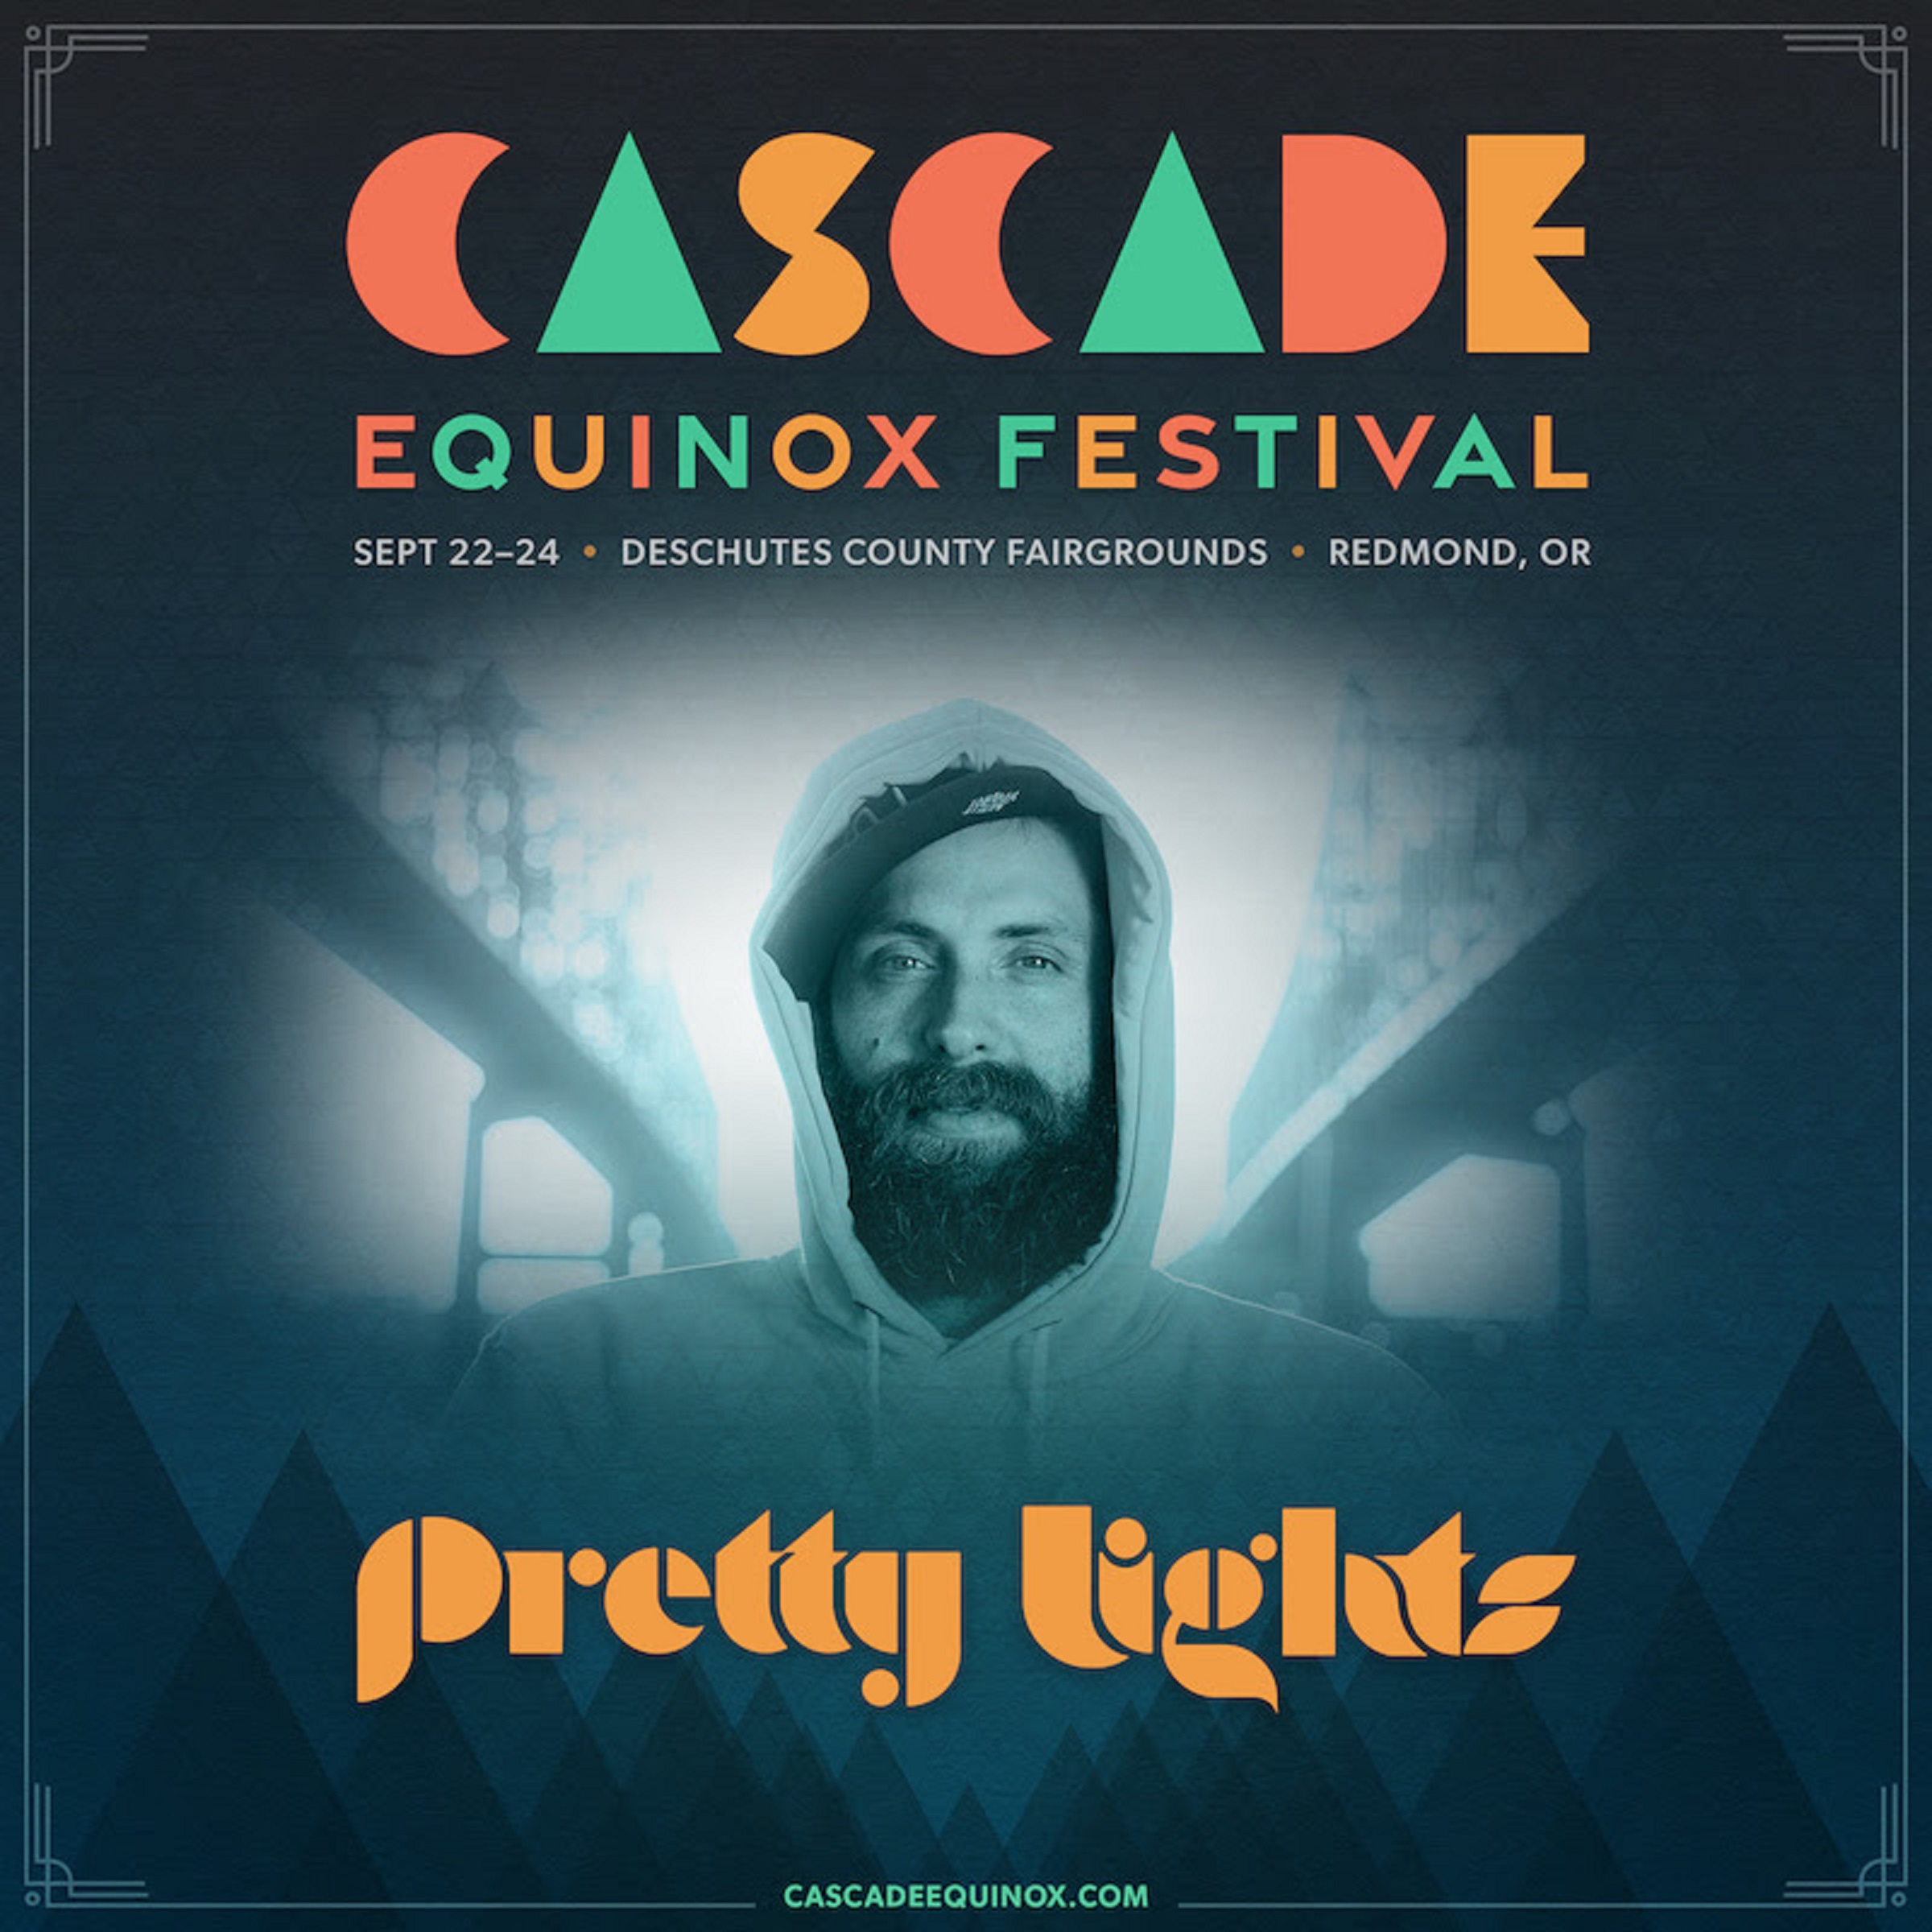 Cascade Equinox announces electro-soul pioneer Pretty Lights as first headliner